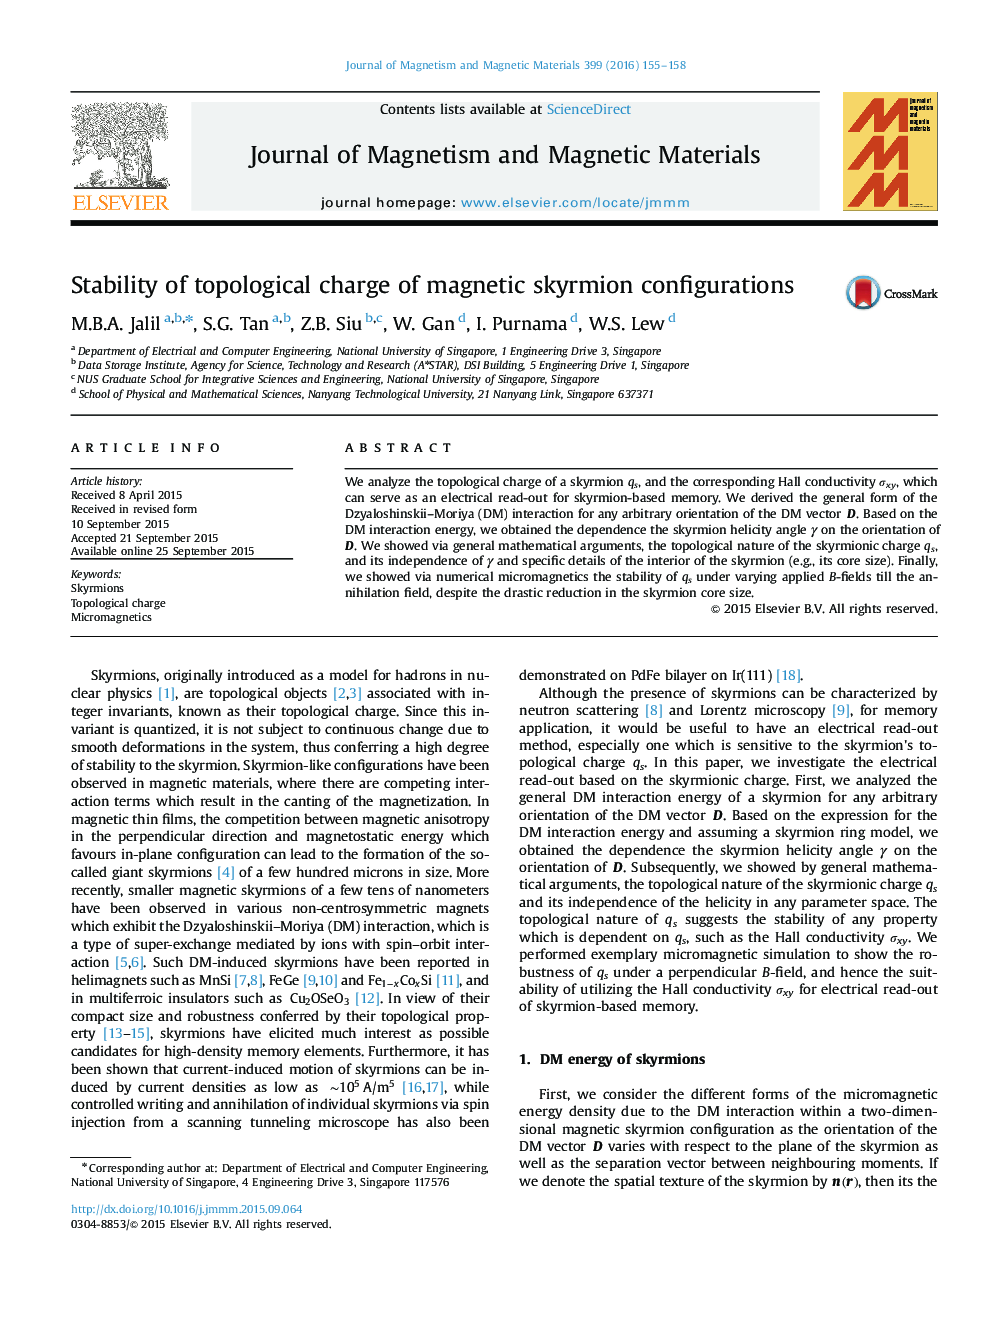 Stability of topological charge of magnetic skyrmion configurations